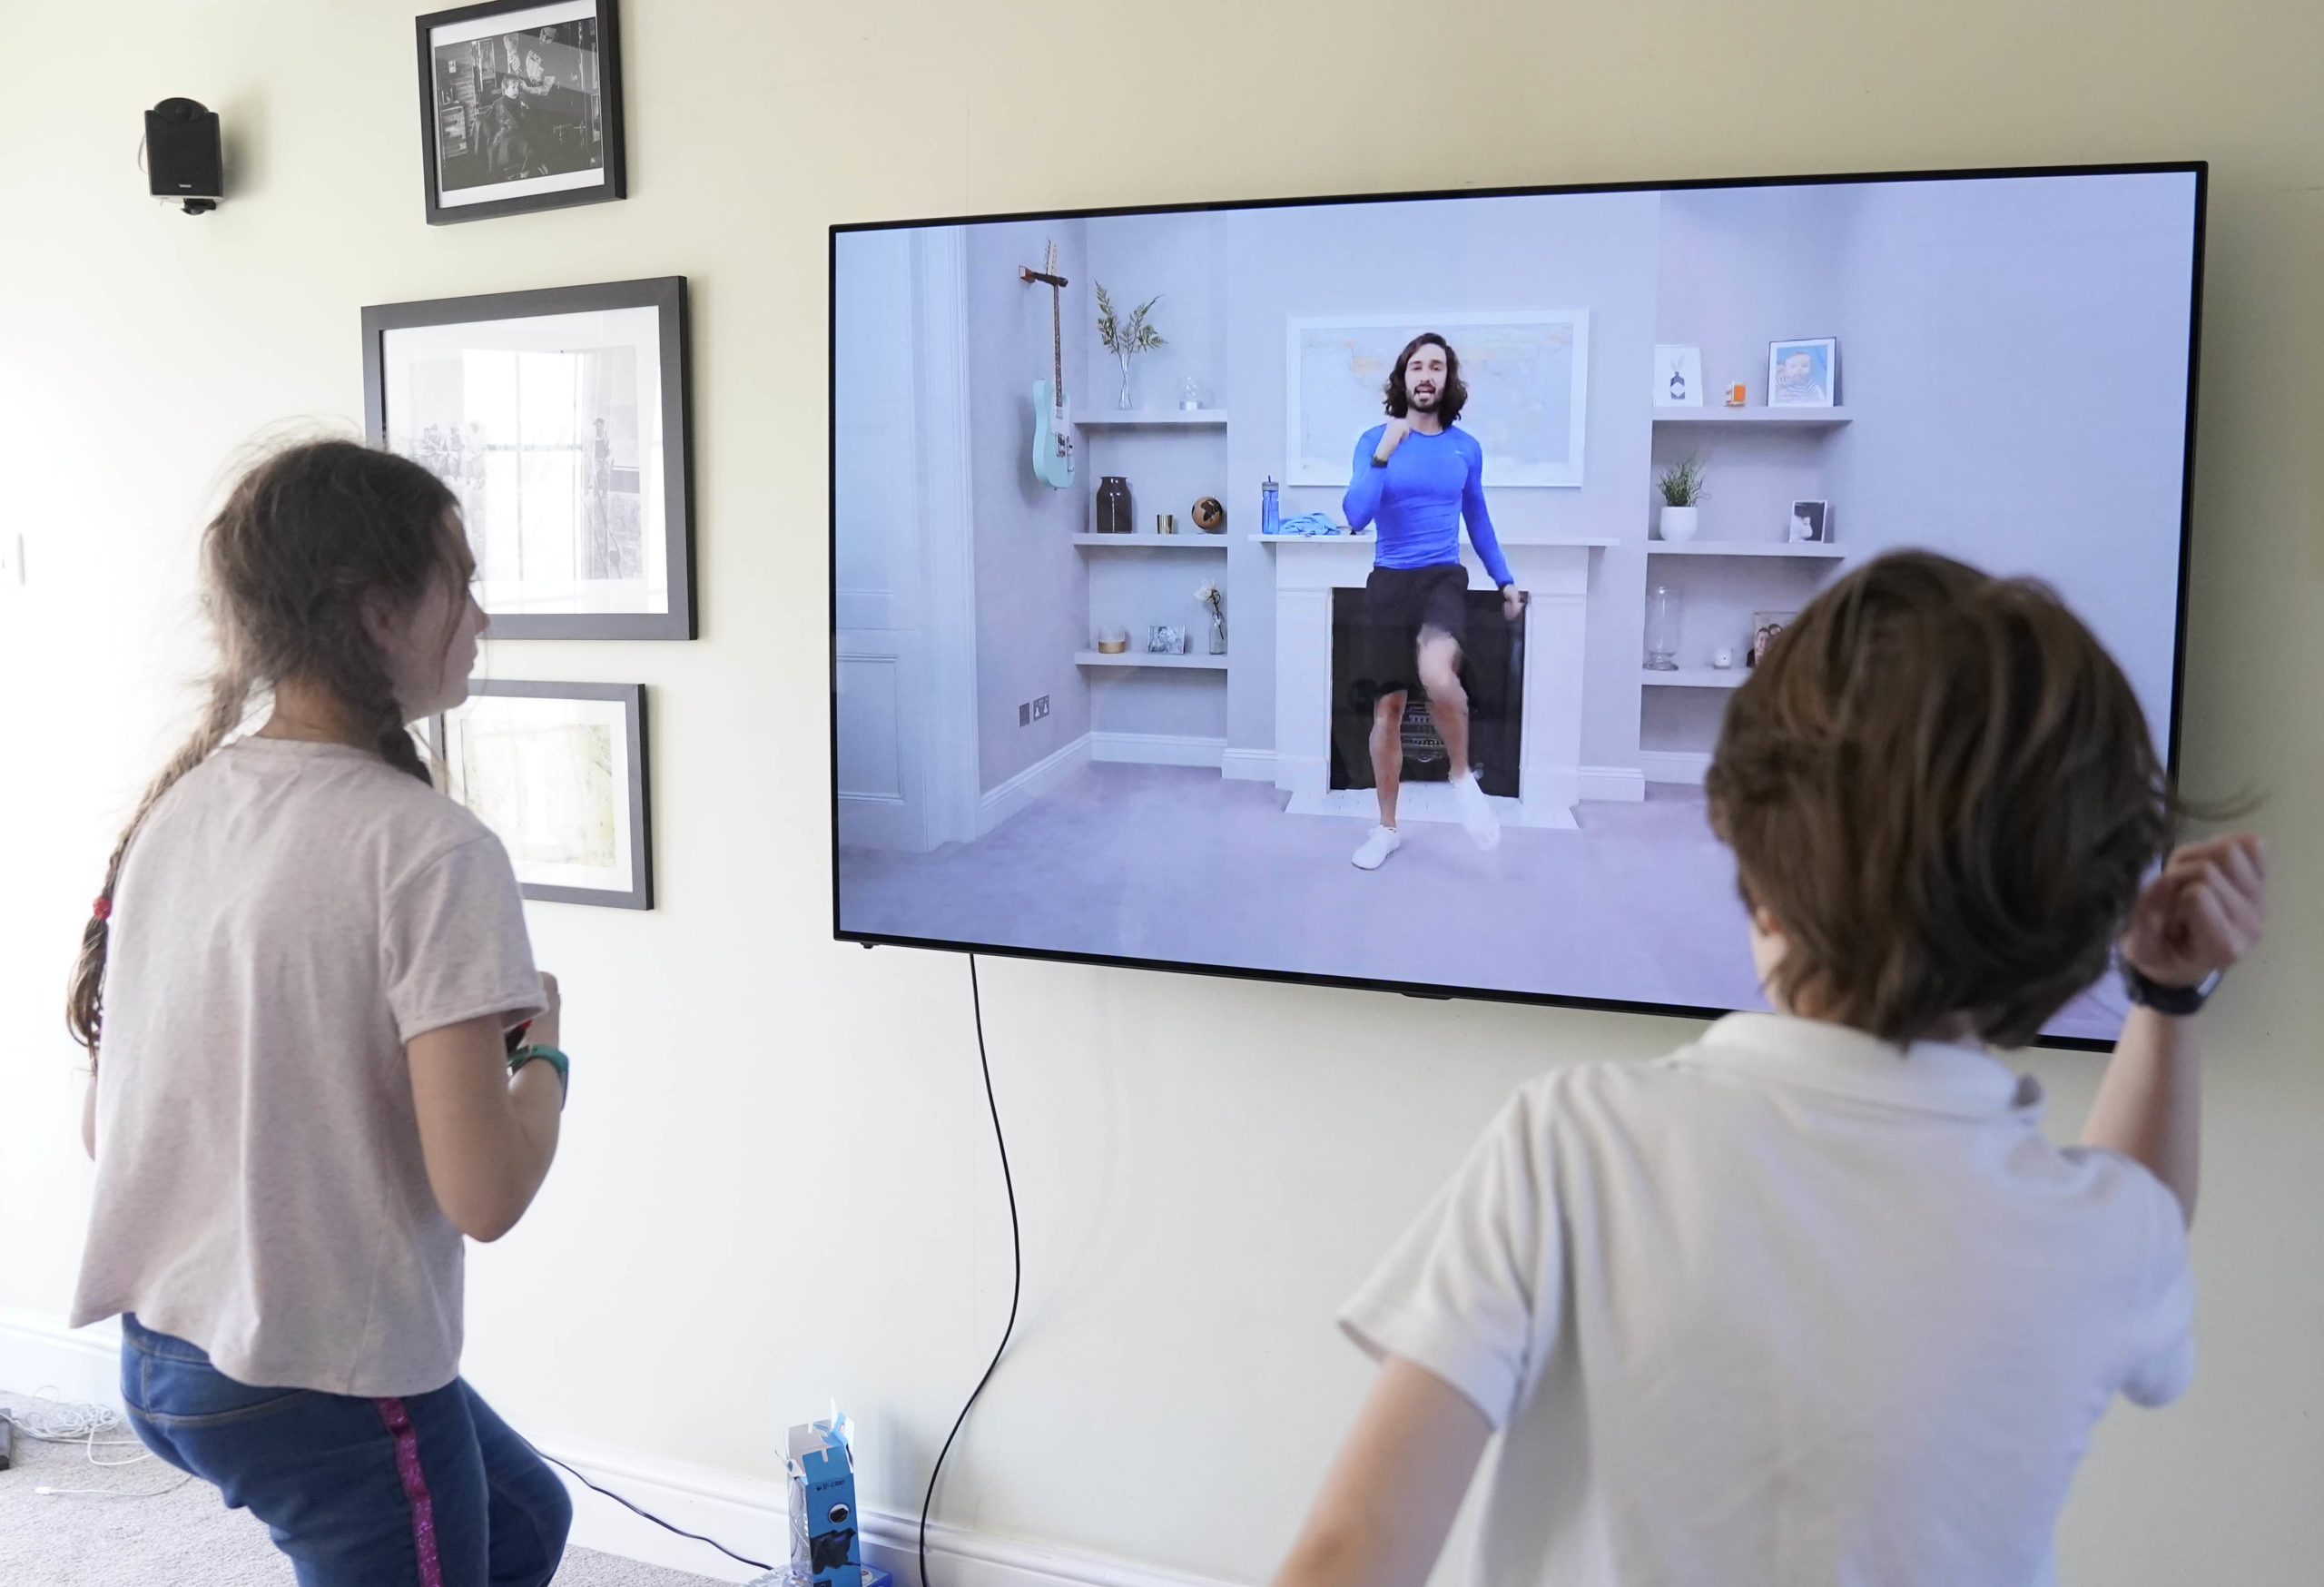 Children take part in an online PE lesson with Joe Wicks